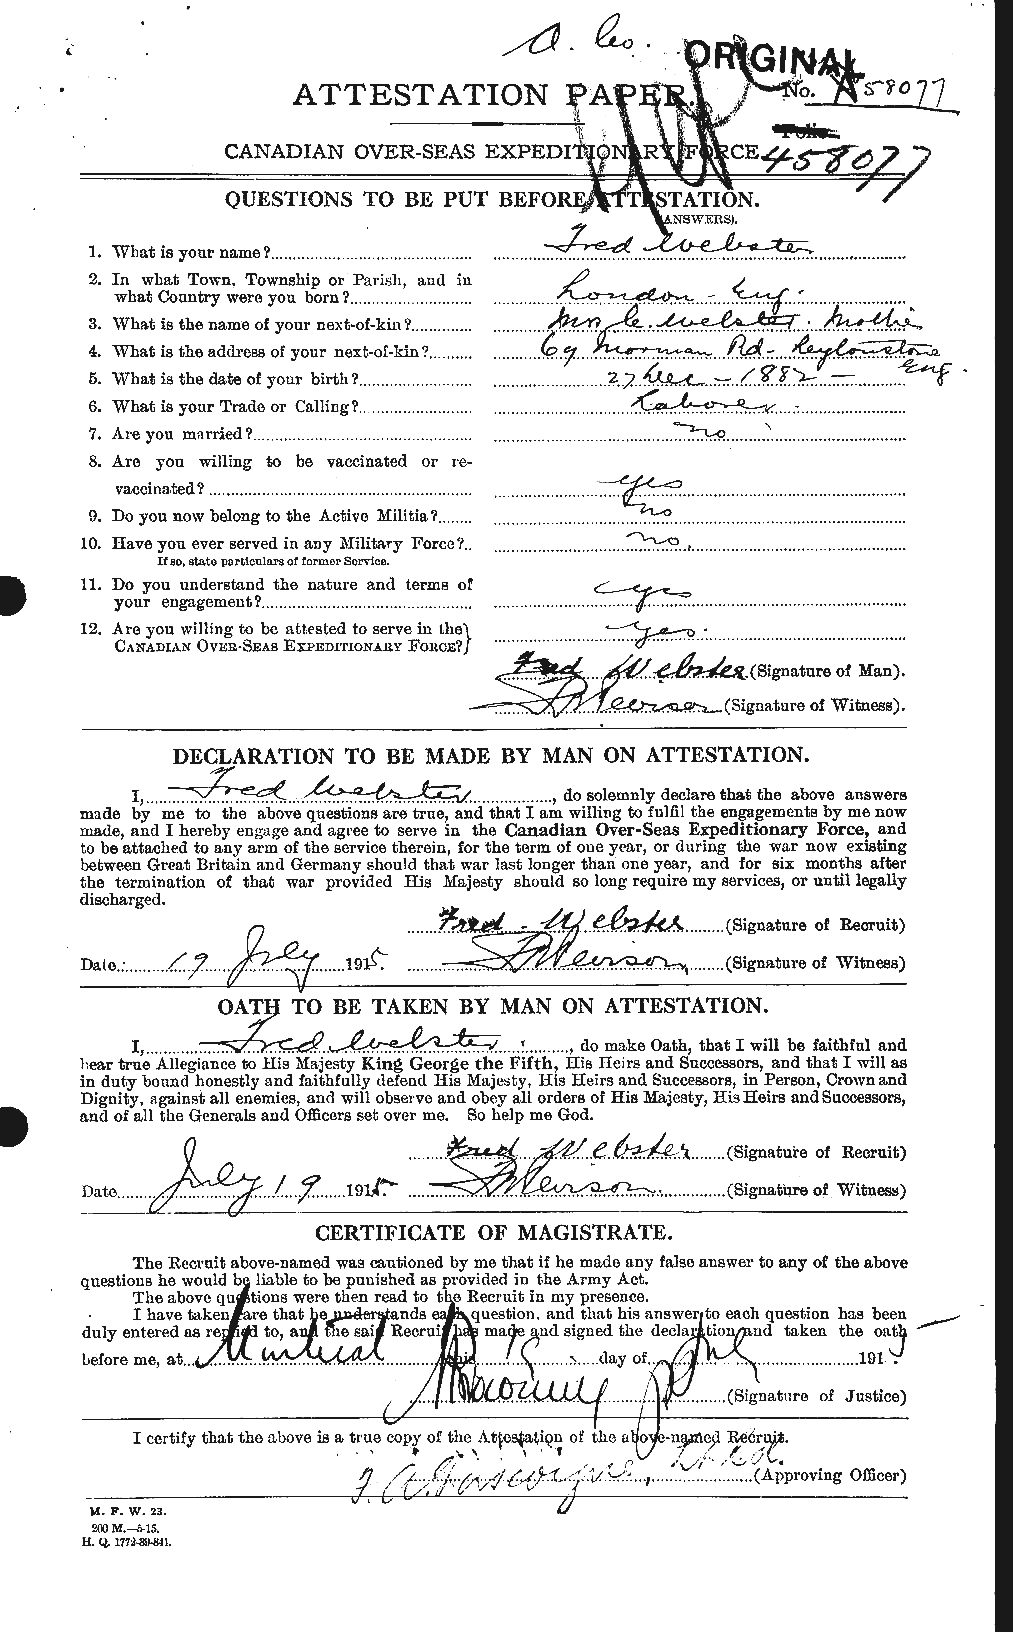 Personnel Records of the First World War - CEF 670356a